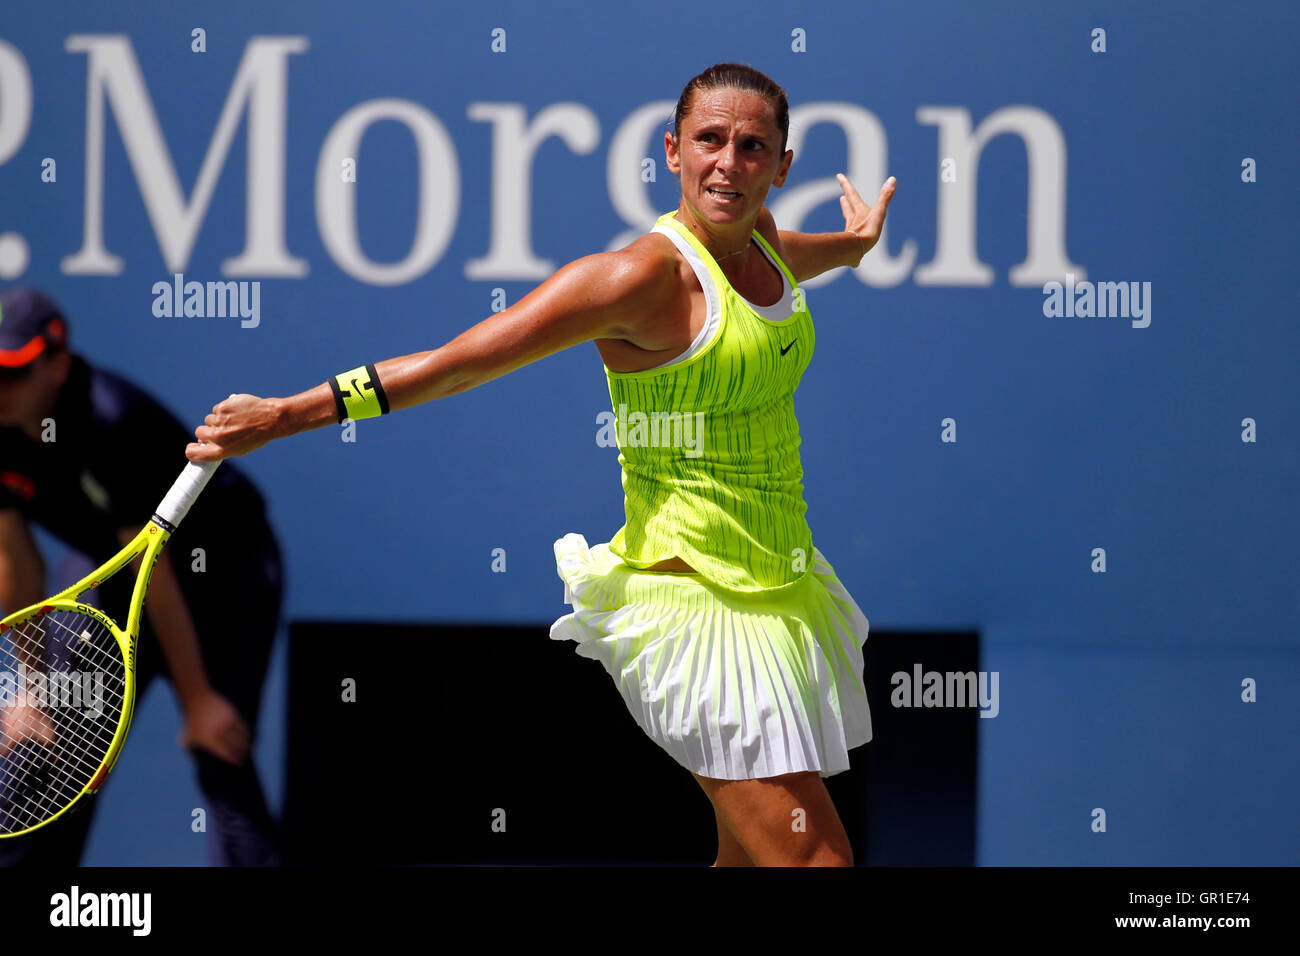 New York, USA. 6th September, 2016. Number 7 seed, Roberta Vinci of Italy during her quarter final match against Number 2 seed, Angelique Kerber of Germany at the United States Open Tennis Championships at Flushing Meadows, New York on Tuesday, September 6th.   Kerber won the match 7-5, 6-0 Credit:  Adam Stoltman/Alamy Live News Stock Photo